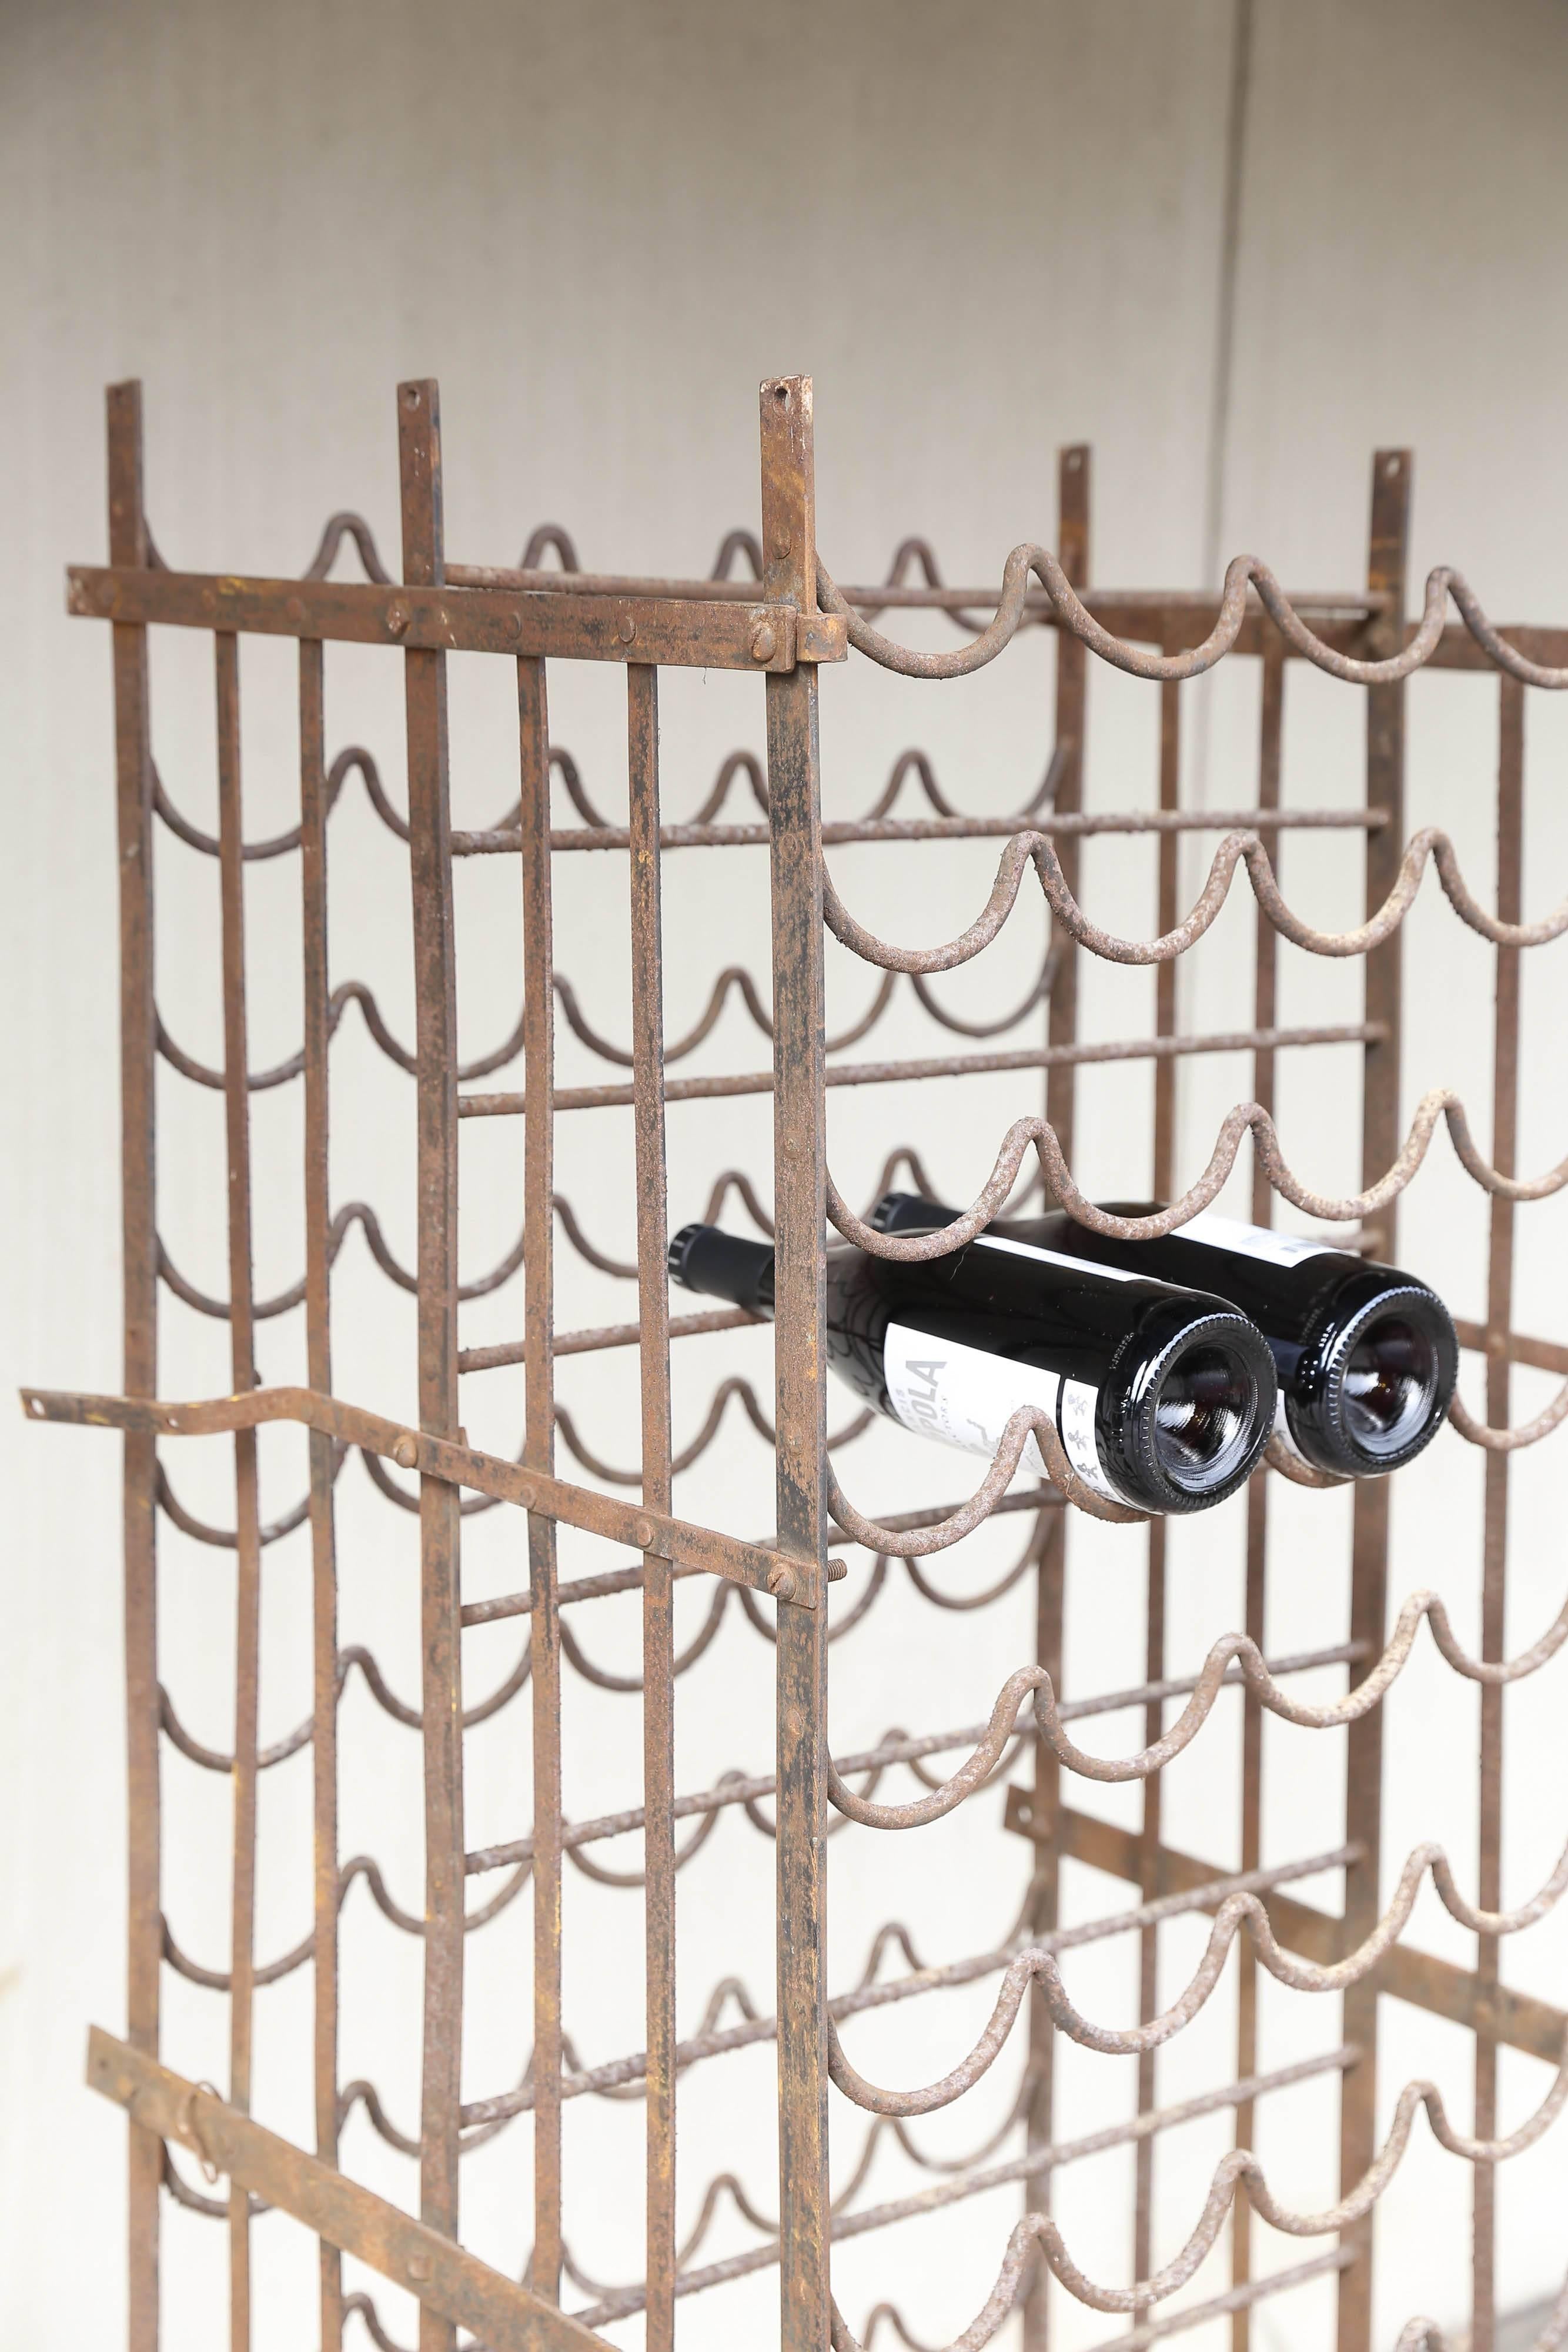 Antique French iron wine rack with door discovered during our recent time in France. Holds multiple bottles in both the front and the rear and can be mounted to the wall or floor and is lockable. Given its age and use, it's heavily distressed with